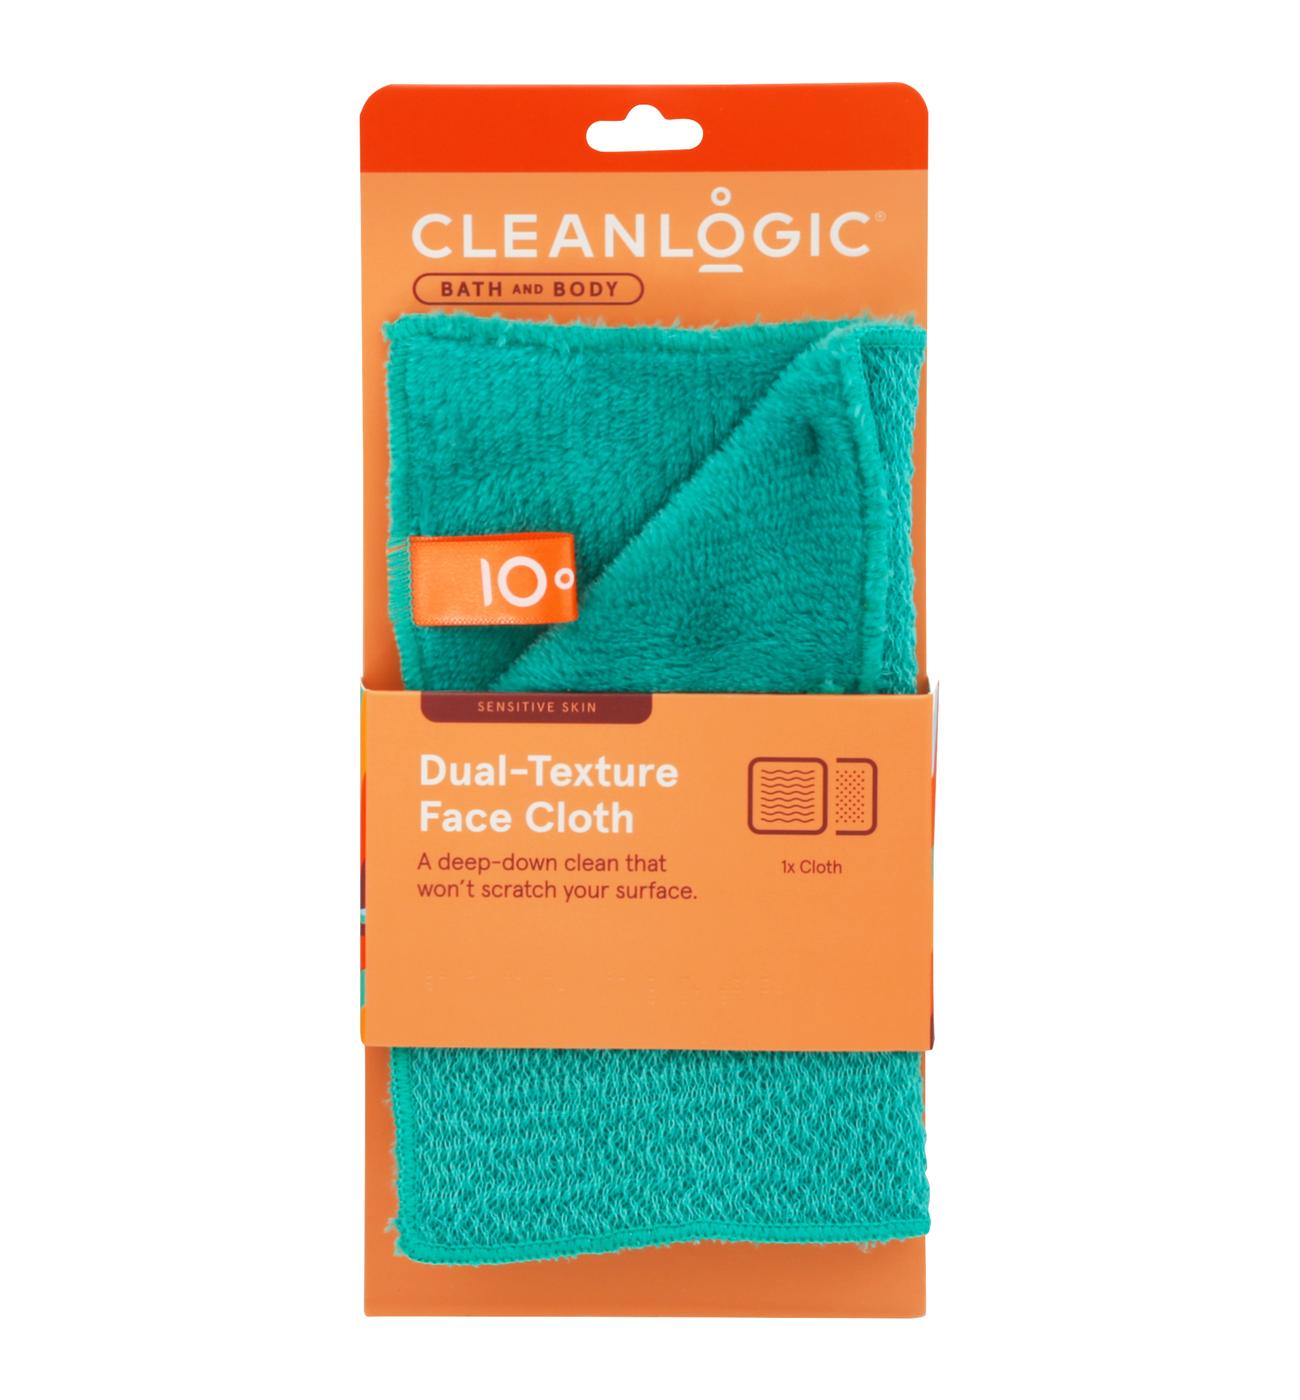 Cleanlogic Dual-Texture Face Cloth for Sensitive Skin; image 1 of 2